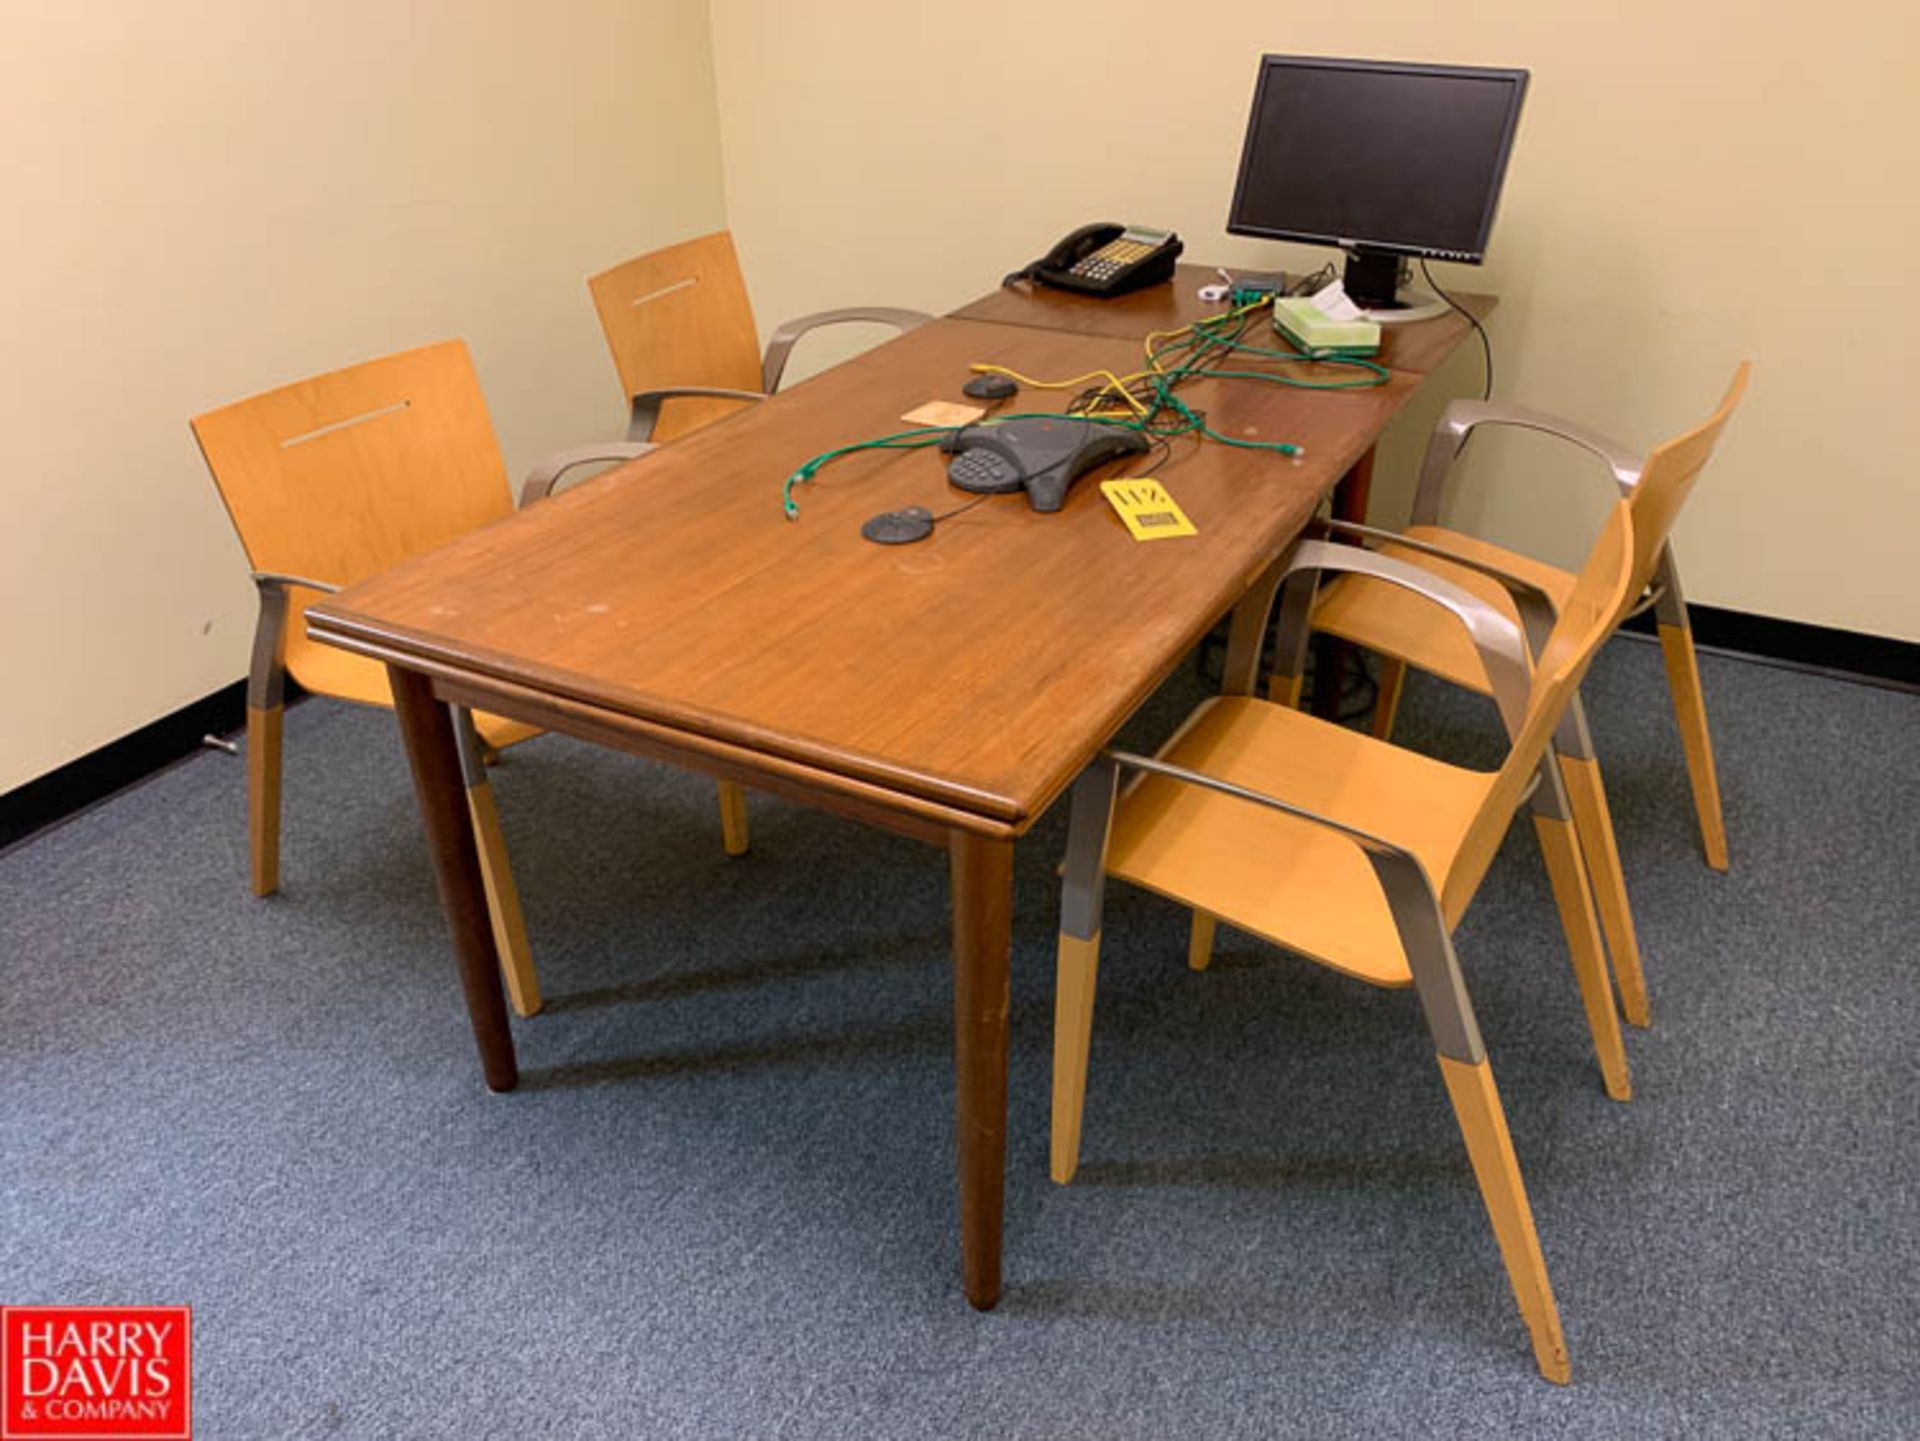 8’ x 4’ Conference Table with (6) Chairs and 81" x 39" Table with (4) Chairs Rigging Fee: $100 - Image 2 of 2